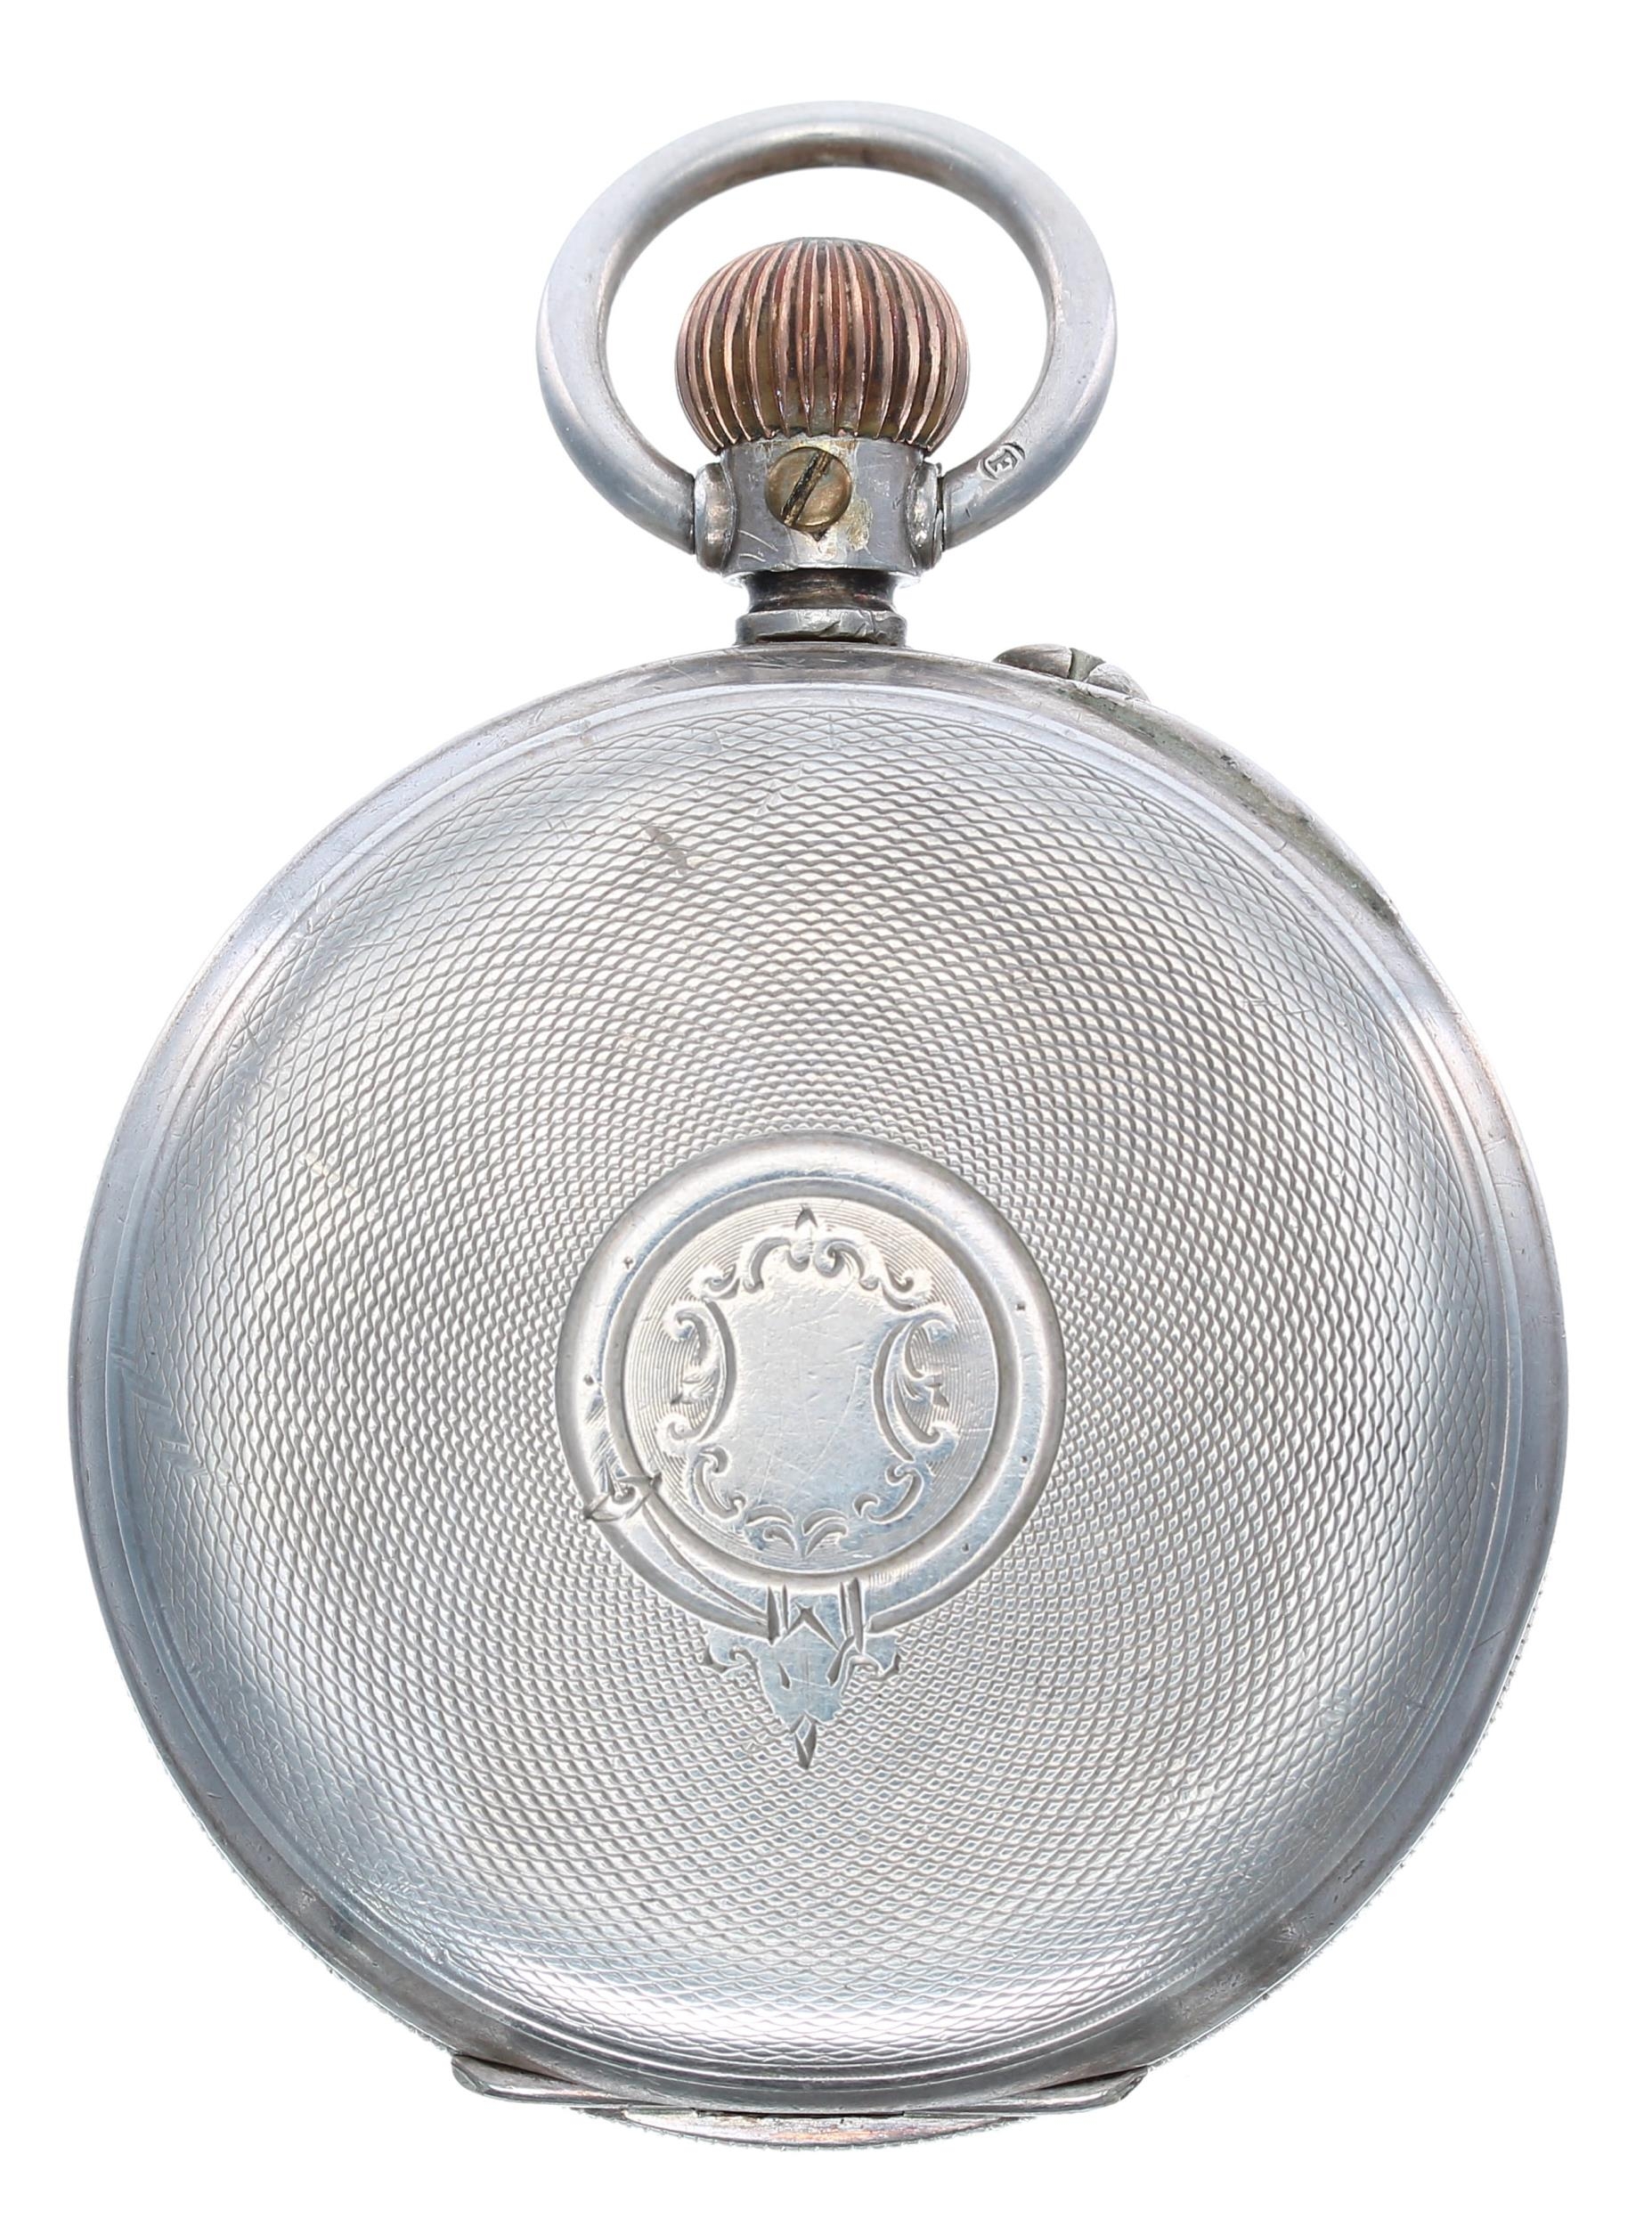 West End Watch Co. 'Excelsior' silver (0.925) lever pocket watch, Longines cal. 19.96 signed - Image 4 of 4